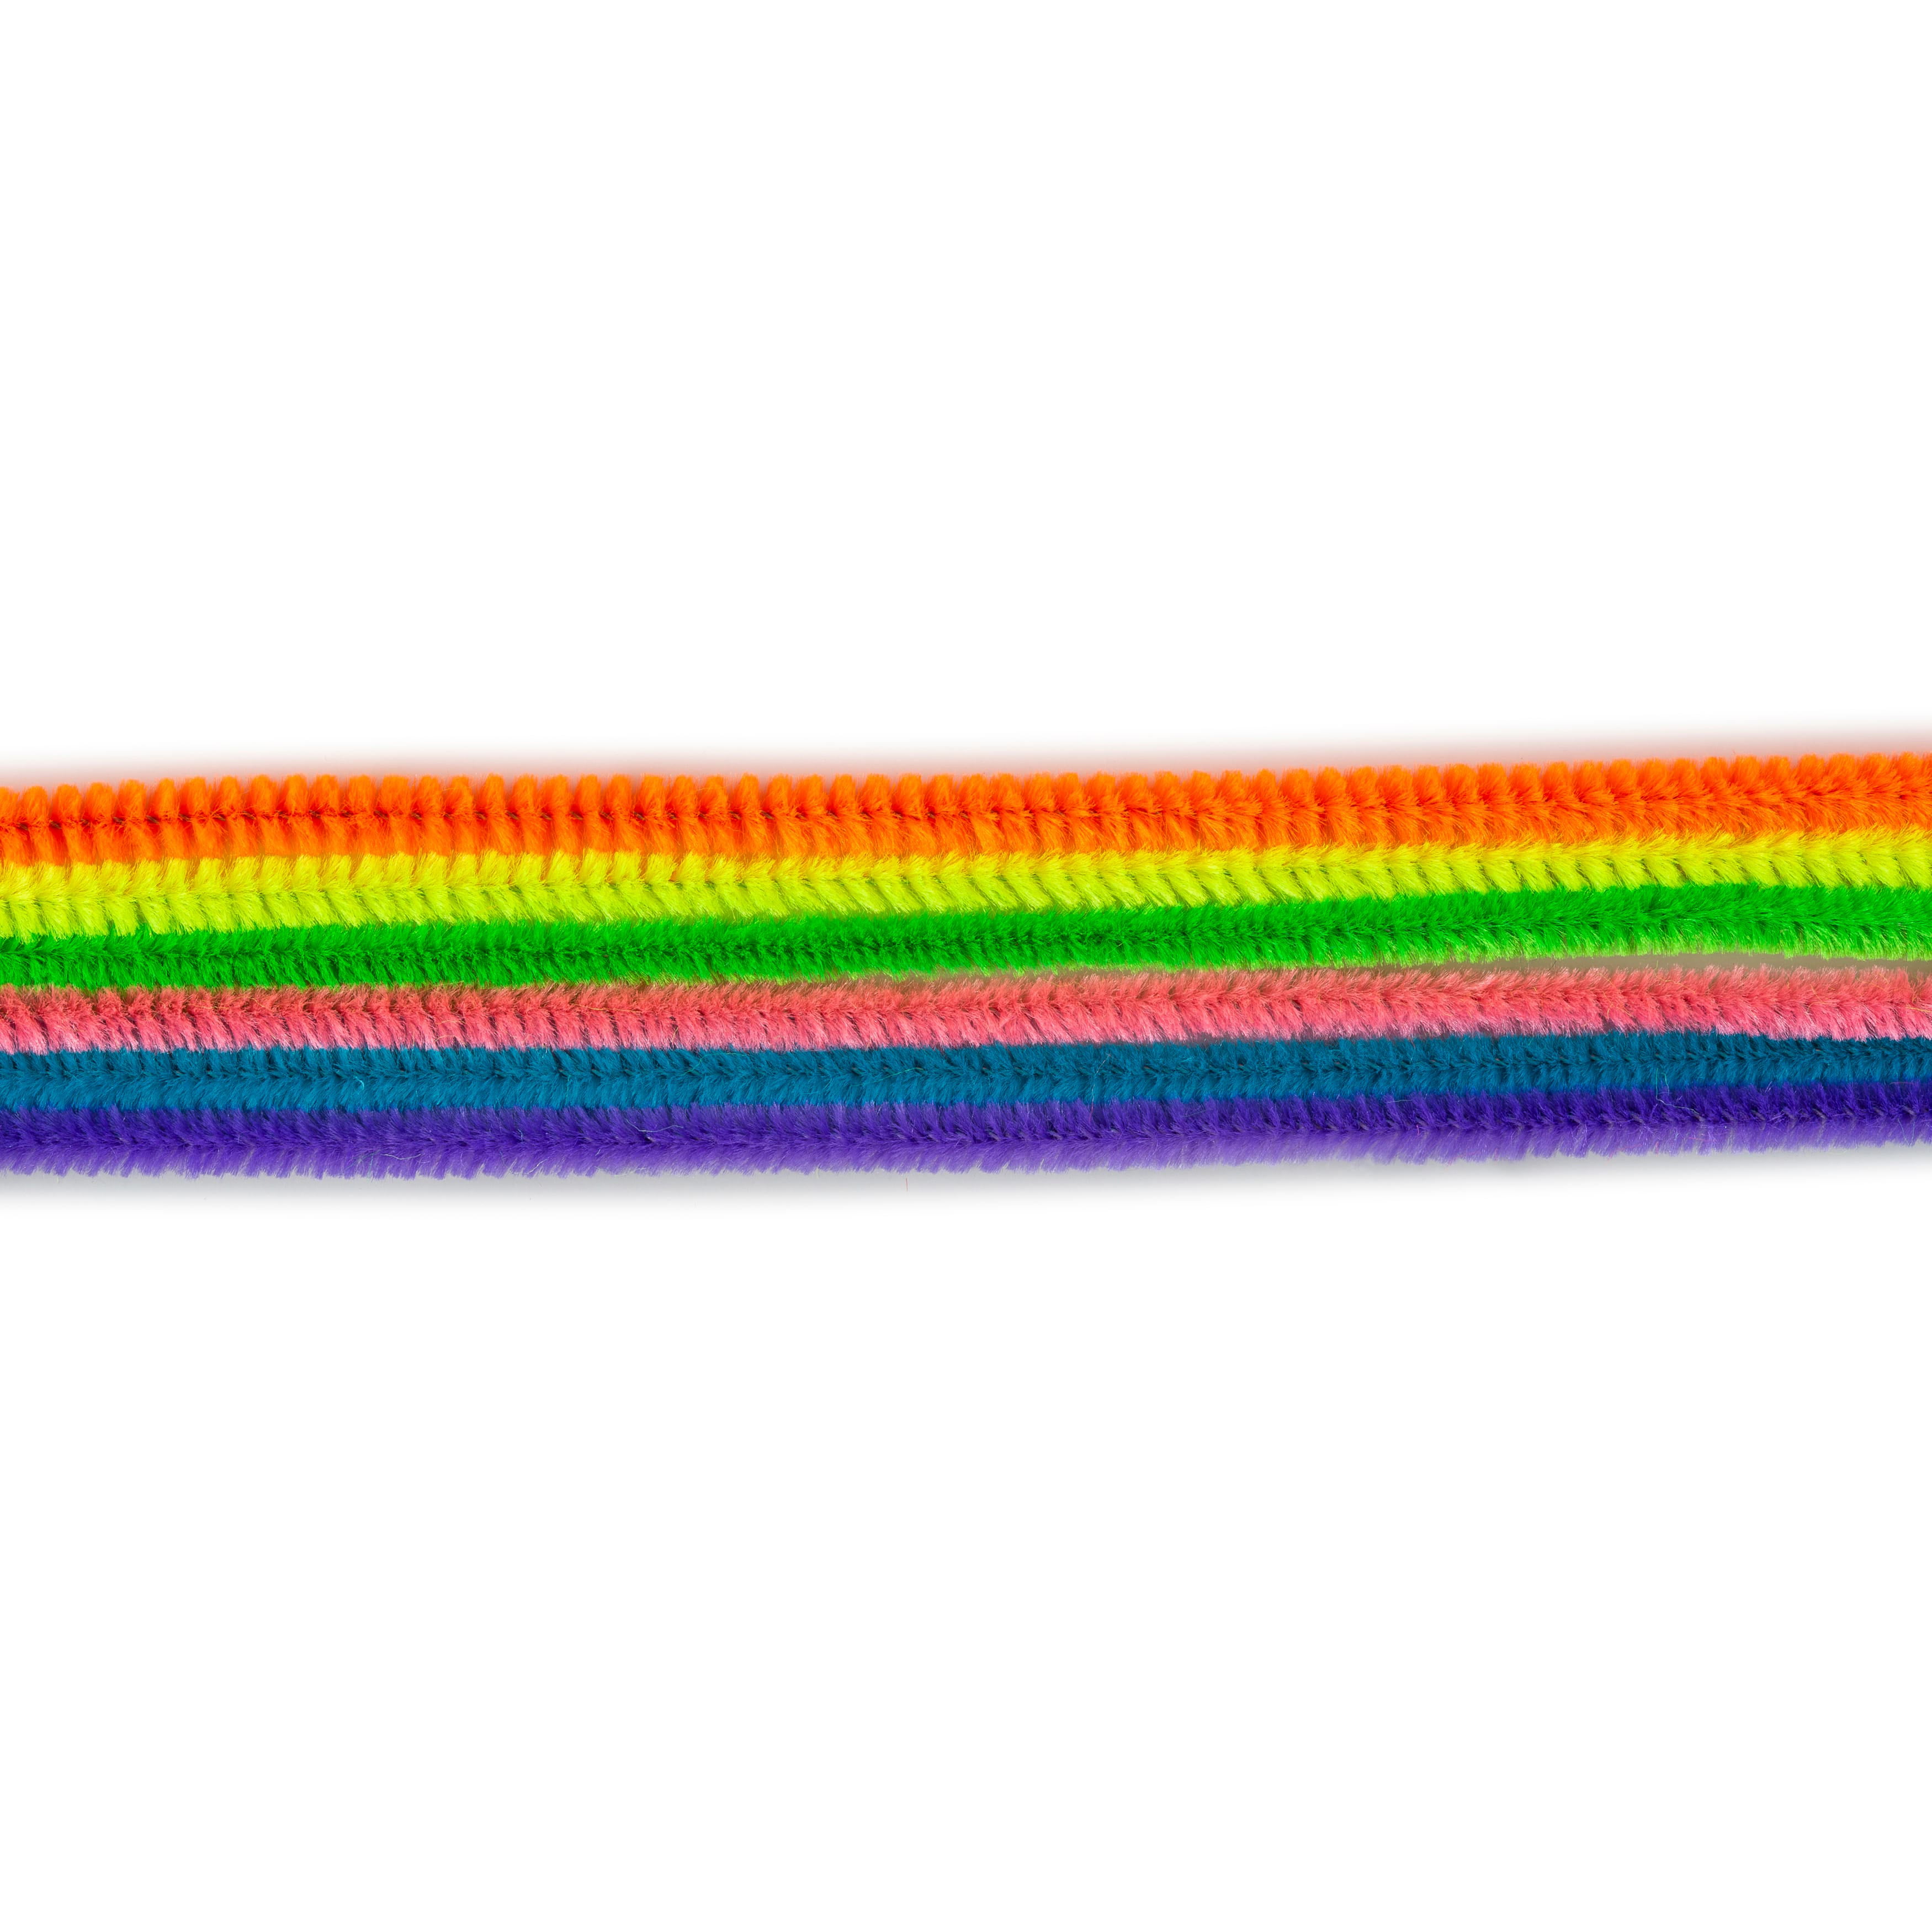 12 Packs: 100 ct. (1,200 total) 6mm Glitter Chenille Pipe Cleaners by  Creatology™